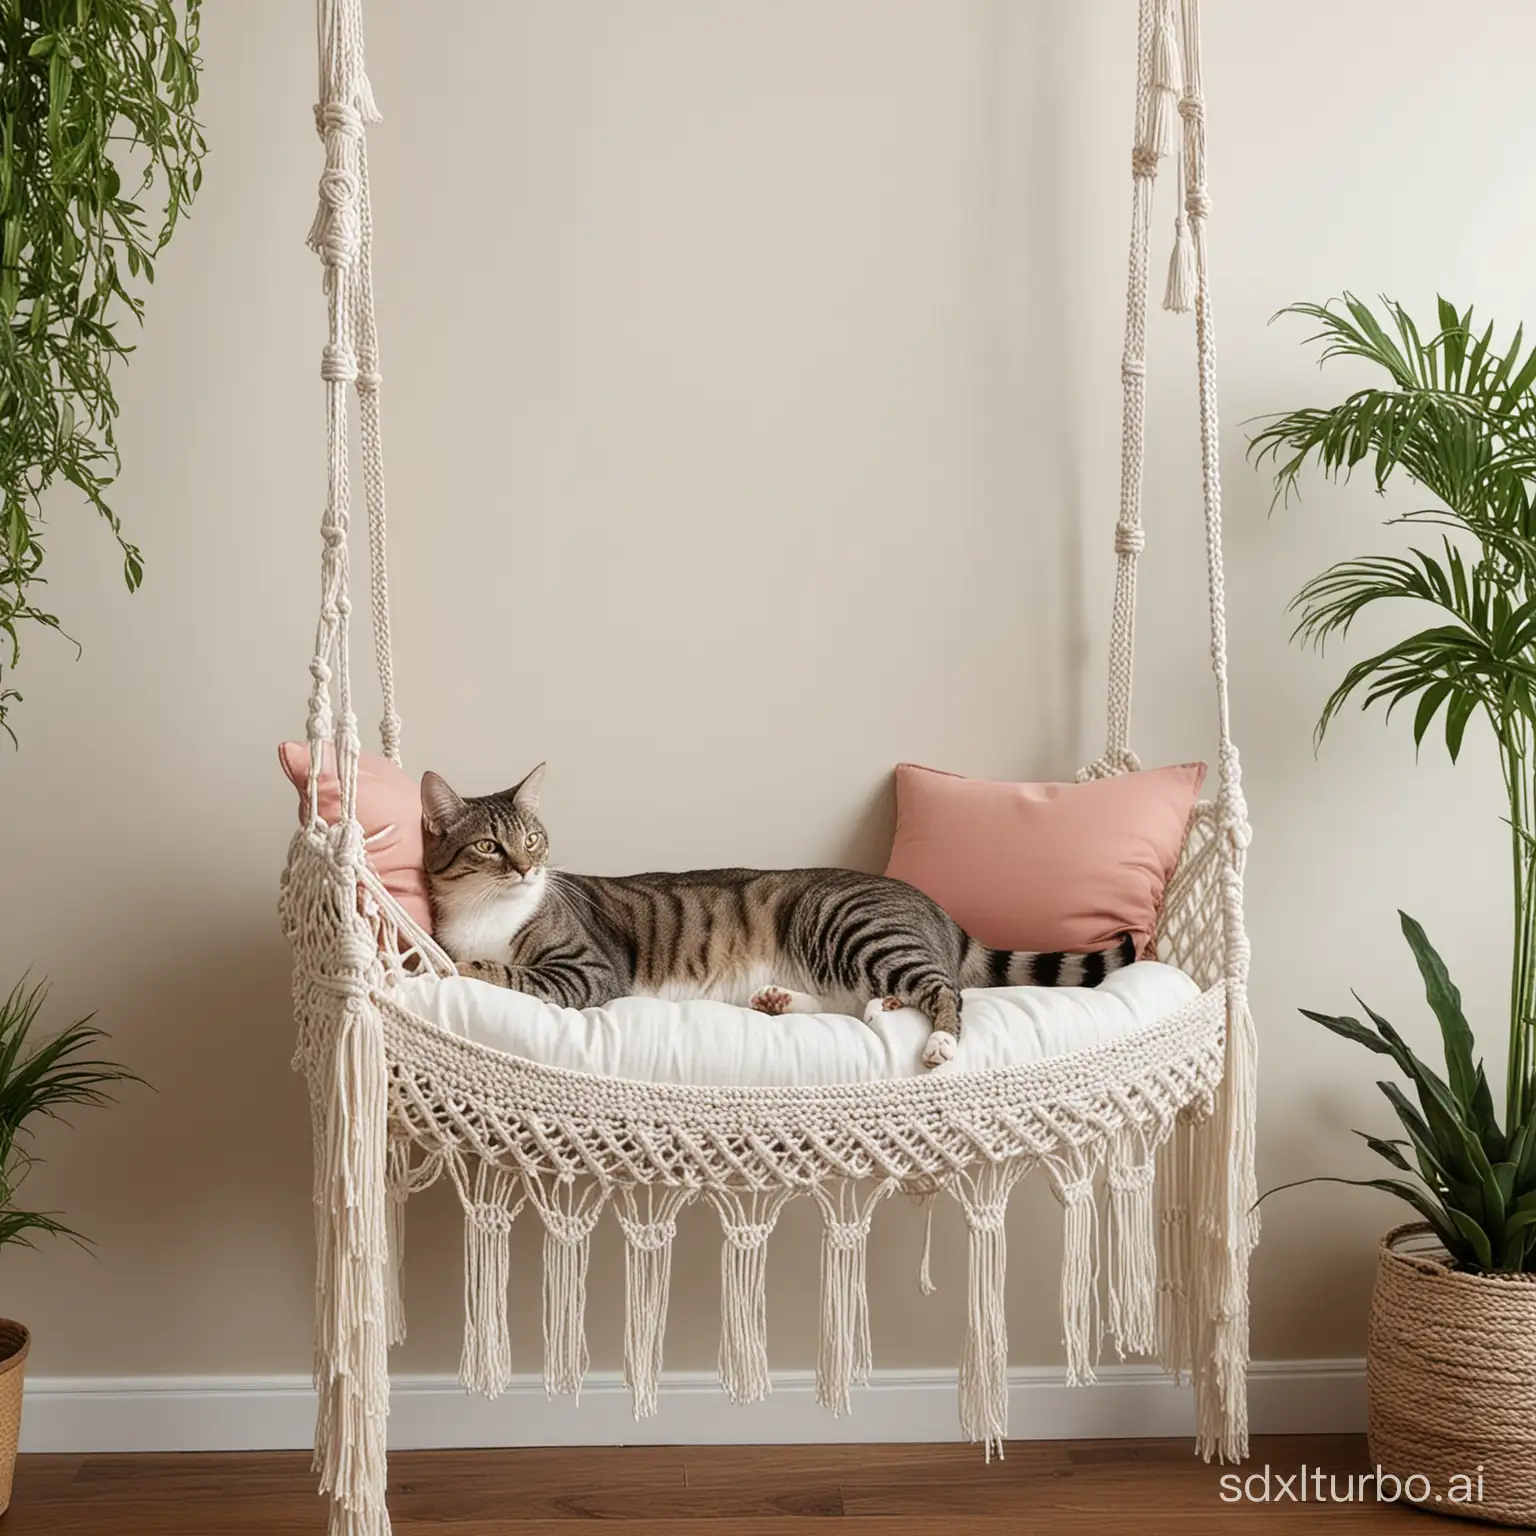 a cat lying at a hanging bed made of macrame boho wall are